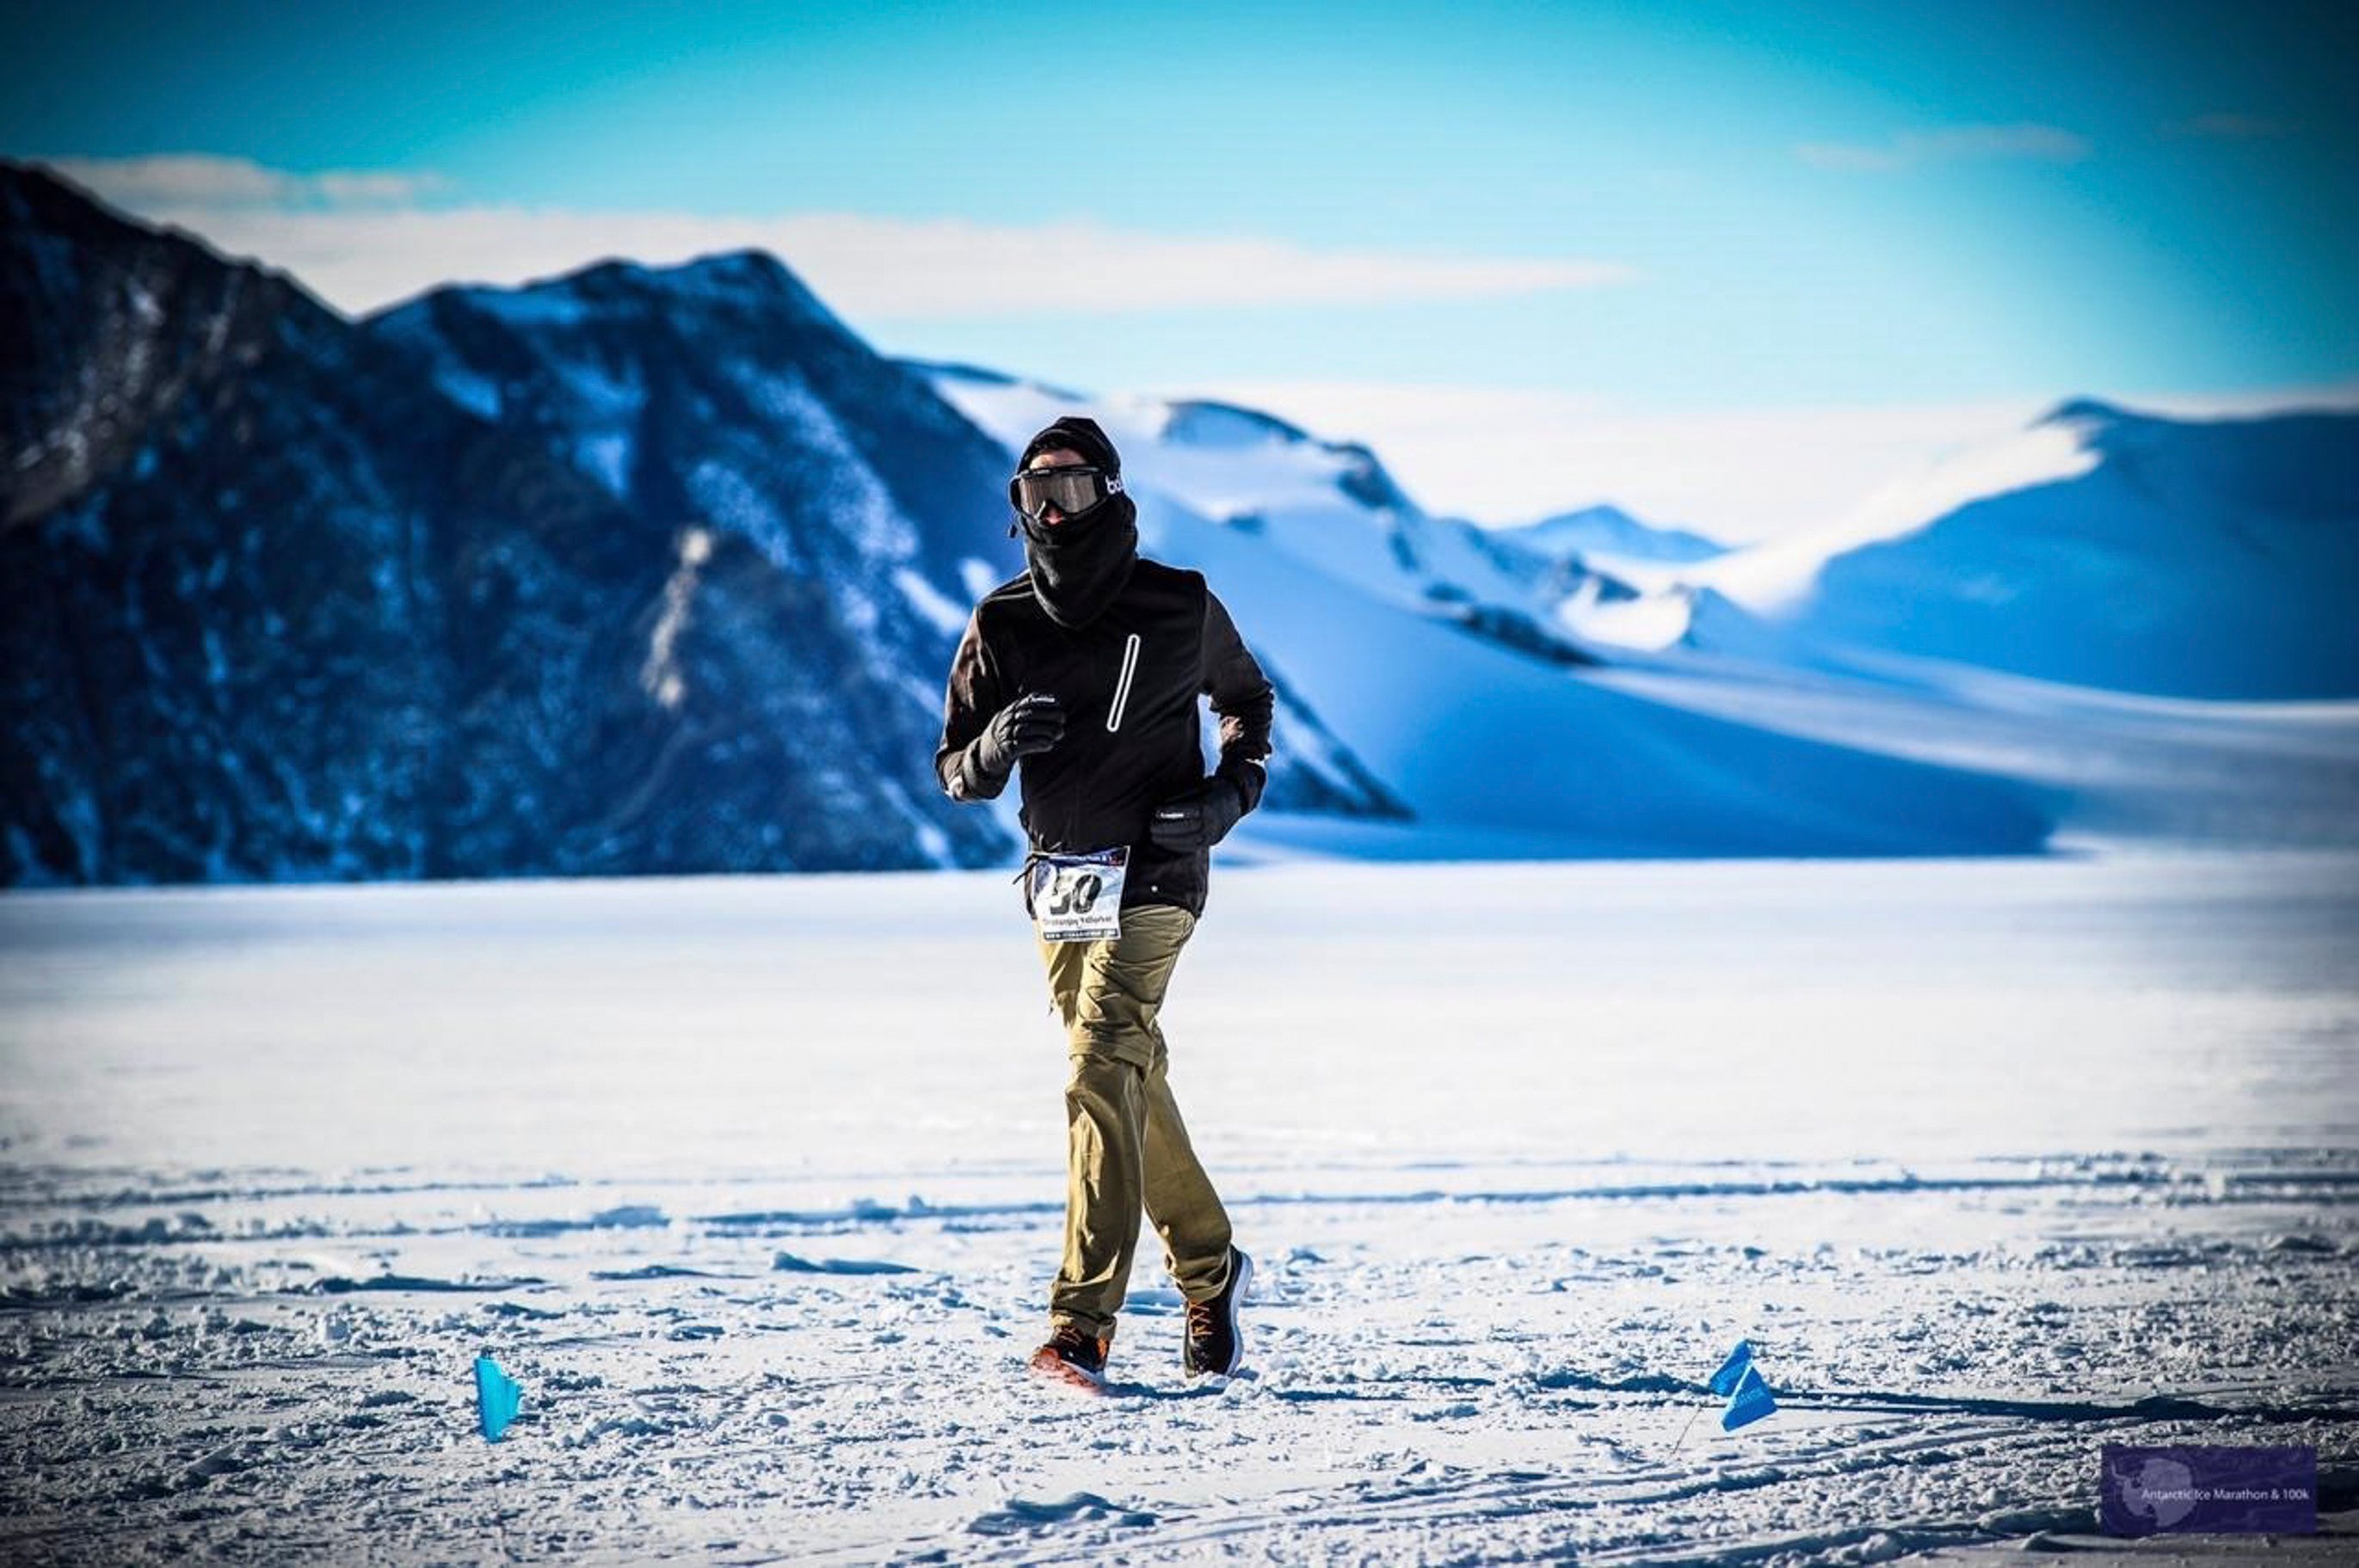 Dhananjay Yellurkar, who suffered a heart attack at 46 and underwent open heart surgery, takes part in the 2018 Antarctic Ice Marathon. Photo: Mark Conlon/Antarctic Ice Marathon